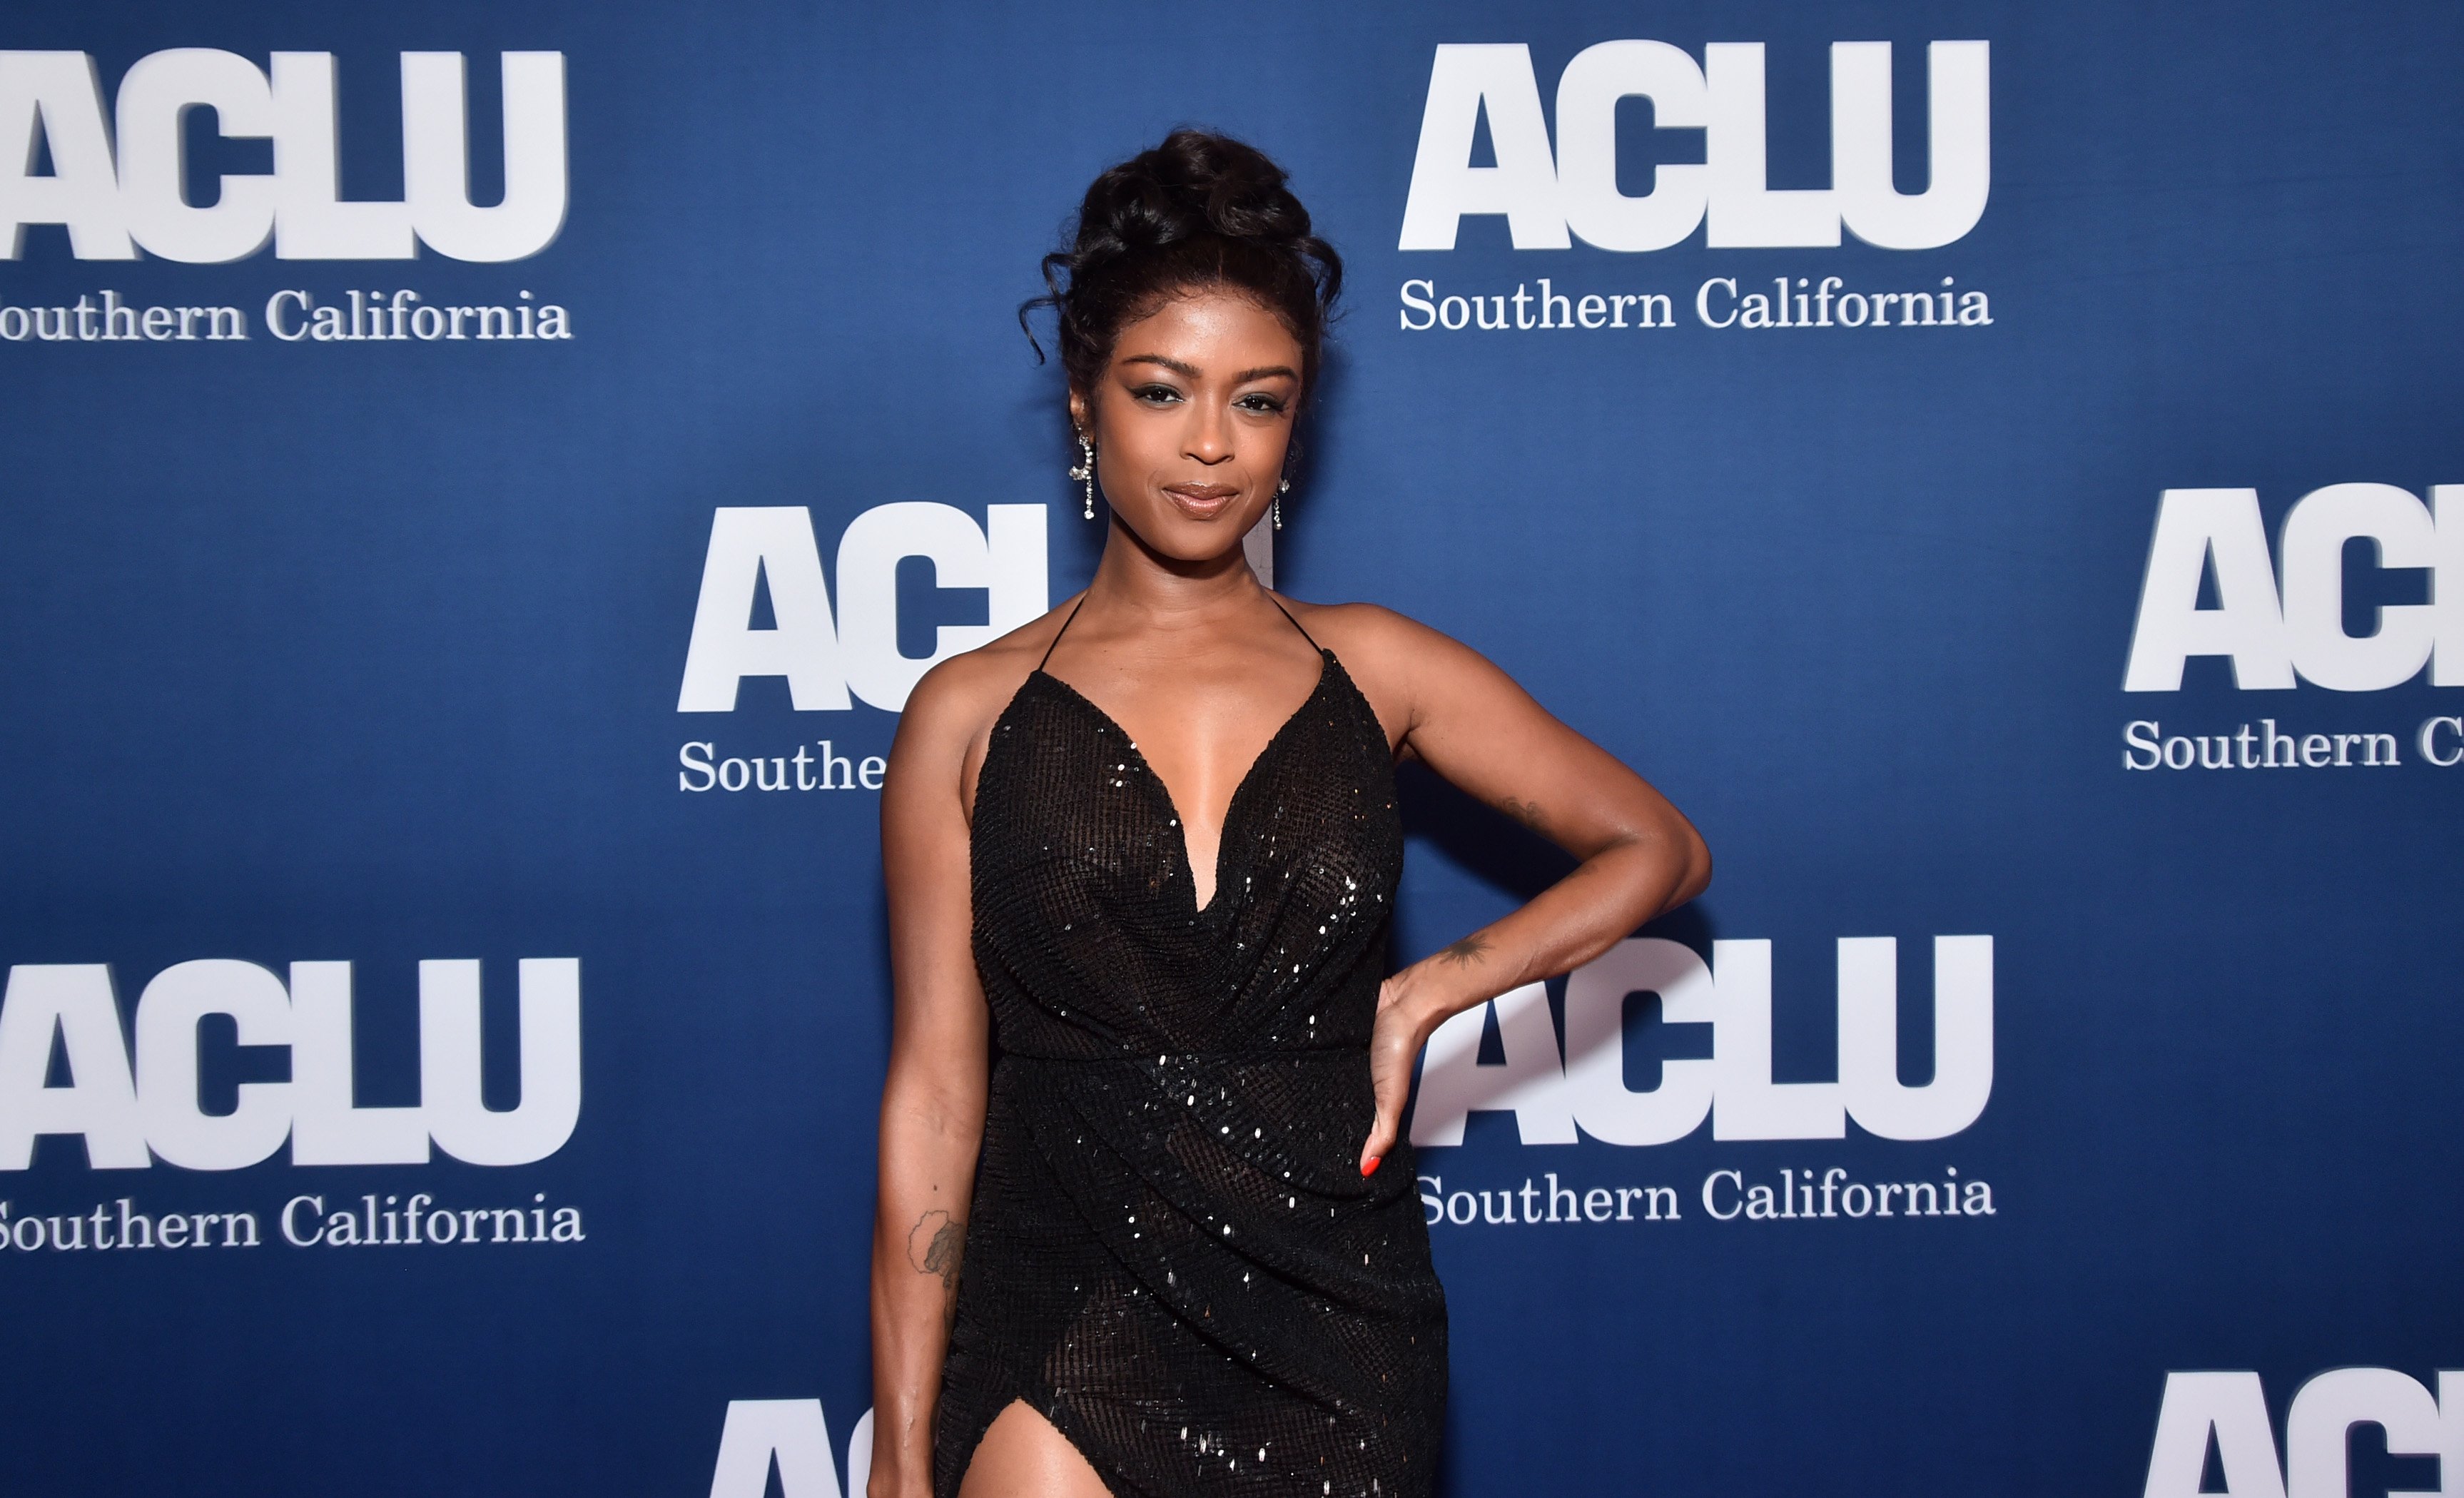 Javicia Leslie at the ACLU SoCal's Annual Bill Of Rights Dinner held at The Beverly Hilton in Beverly Hills, California, on October 16, 2022. | Source: Getty Images